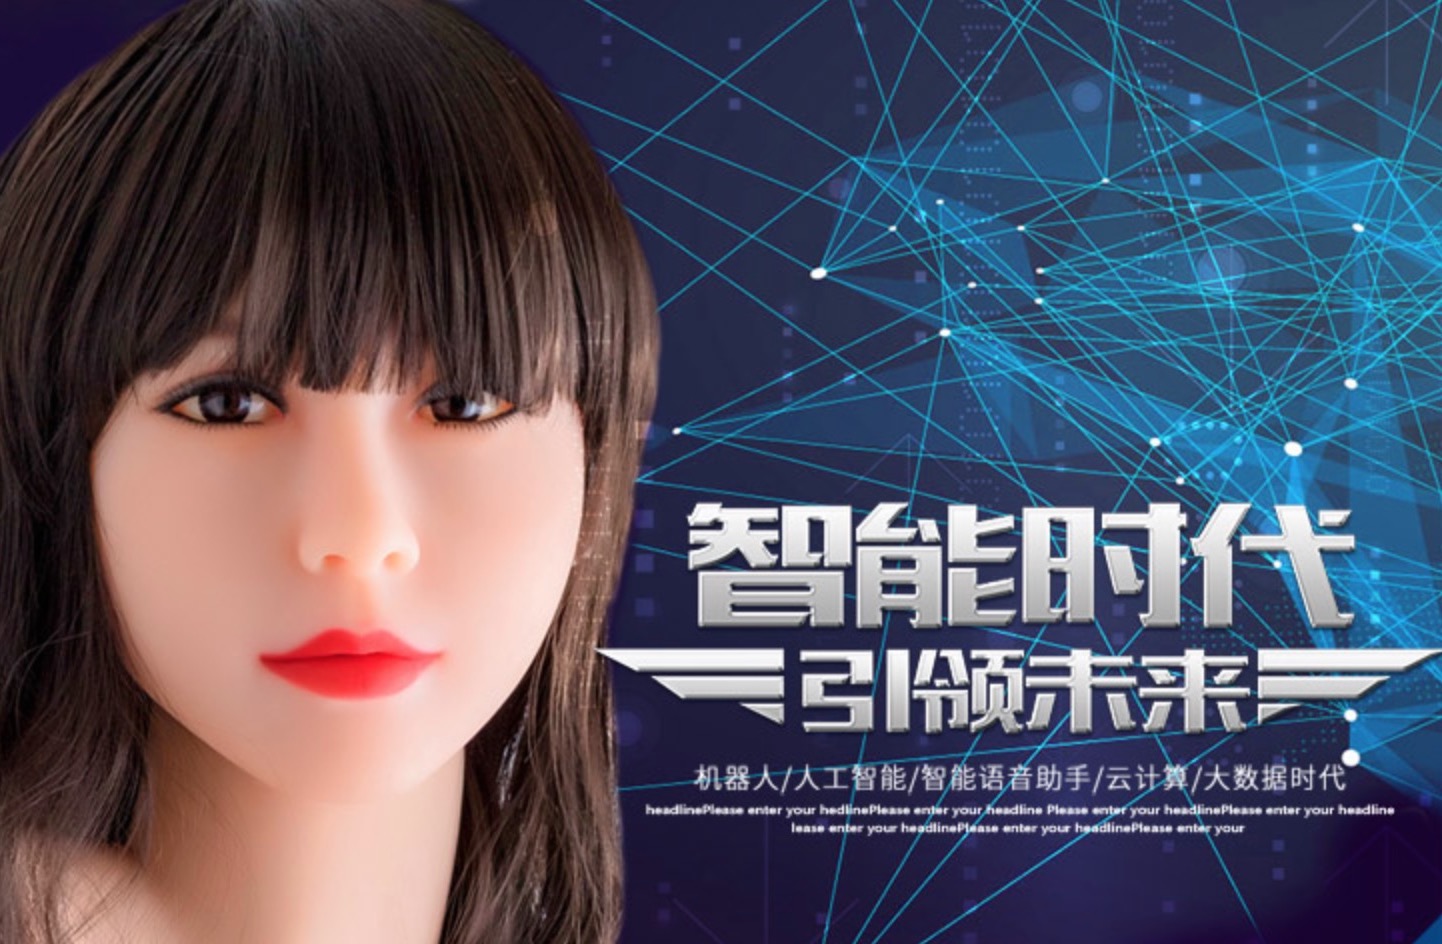 WATCH: High-Tech Sex Doll Talks Using AI in South China – Thatsmags.com